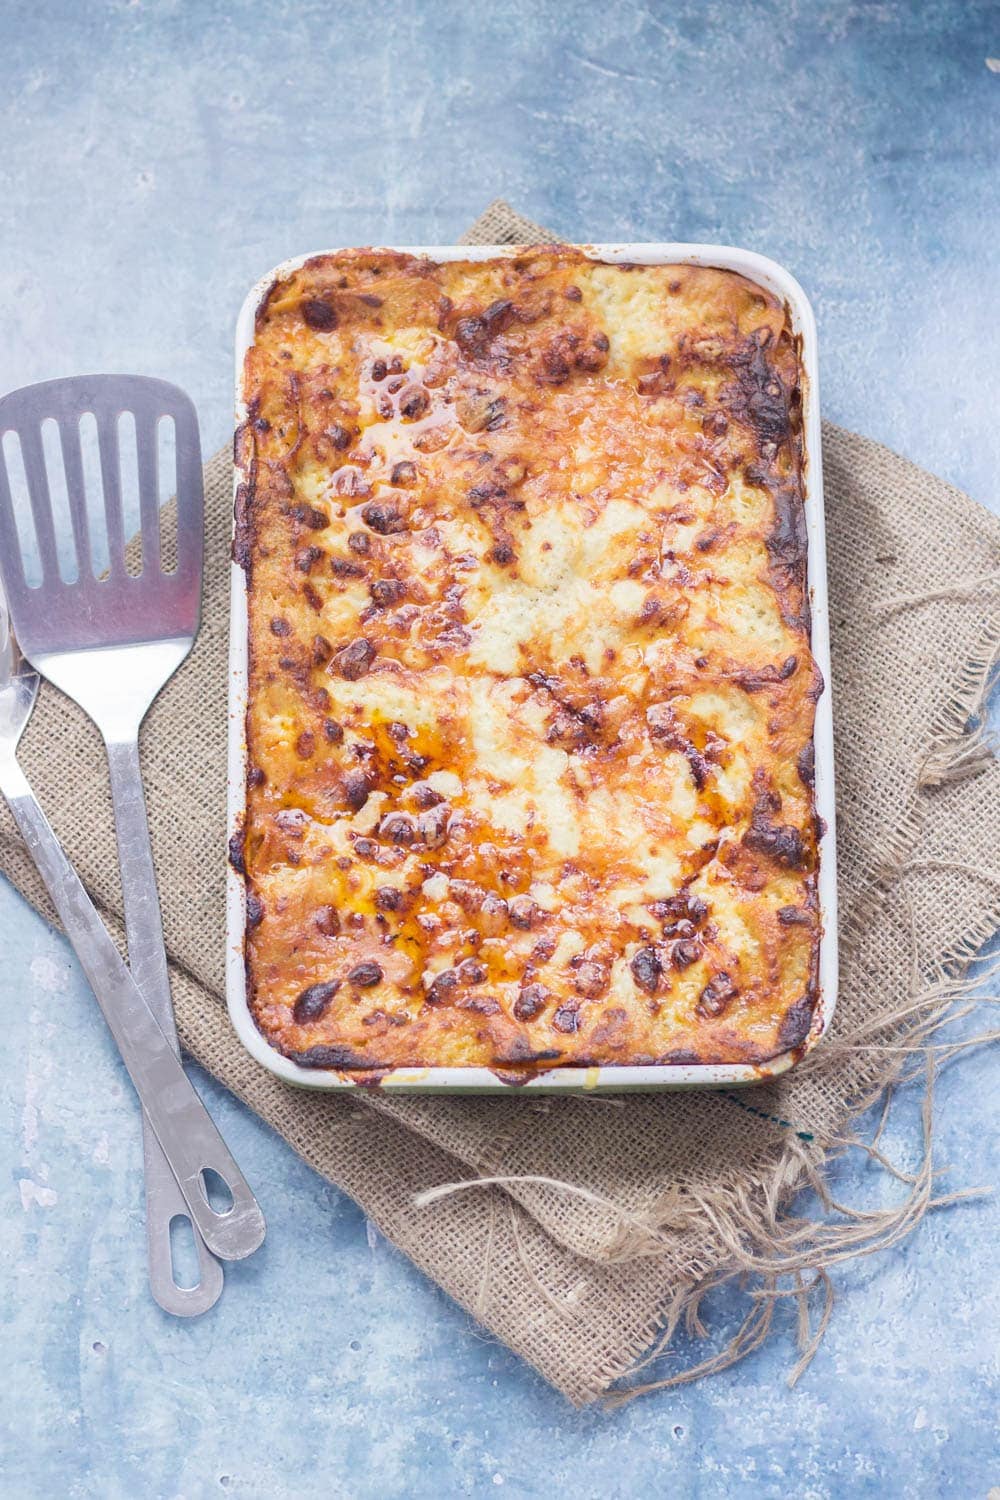 This recipe for a homemade classic beef lasagne is definitely worth the effort. There's nothing quite like a lasagne made from scratch!